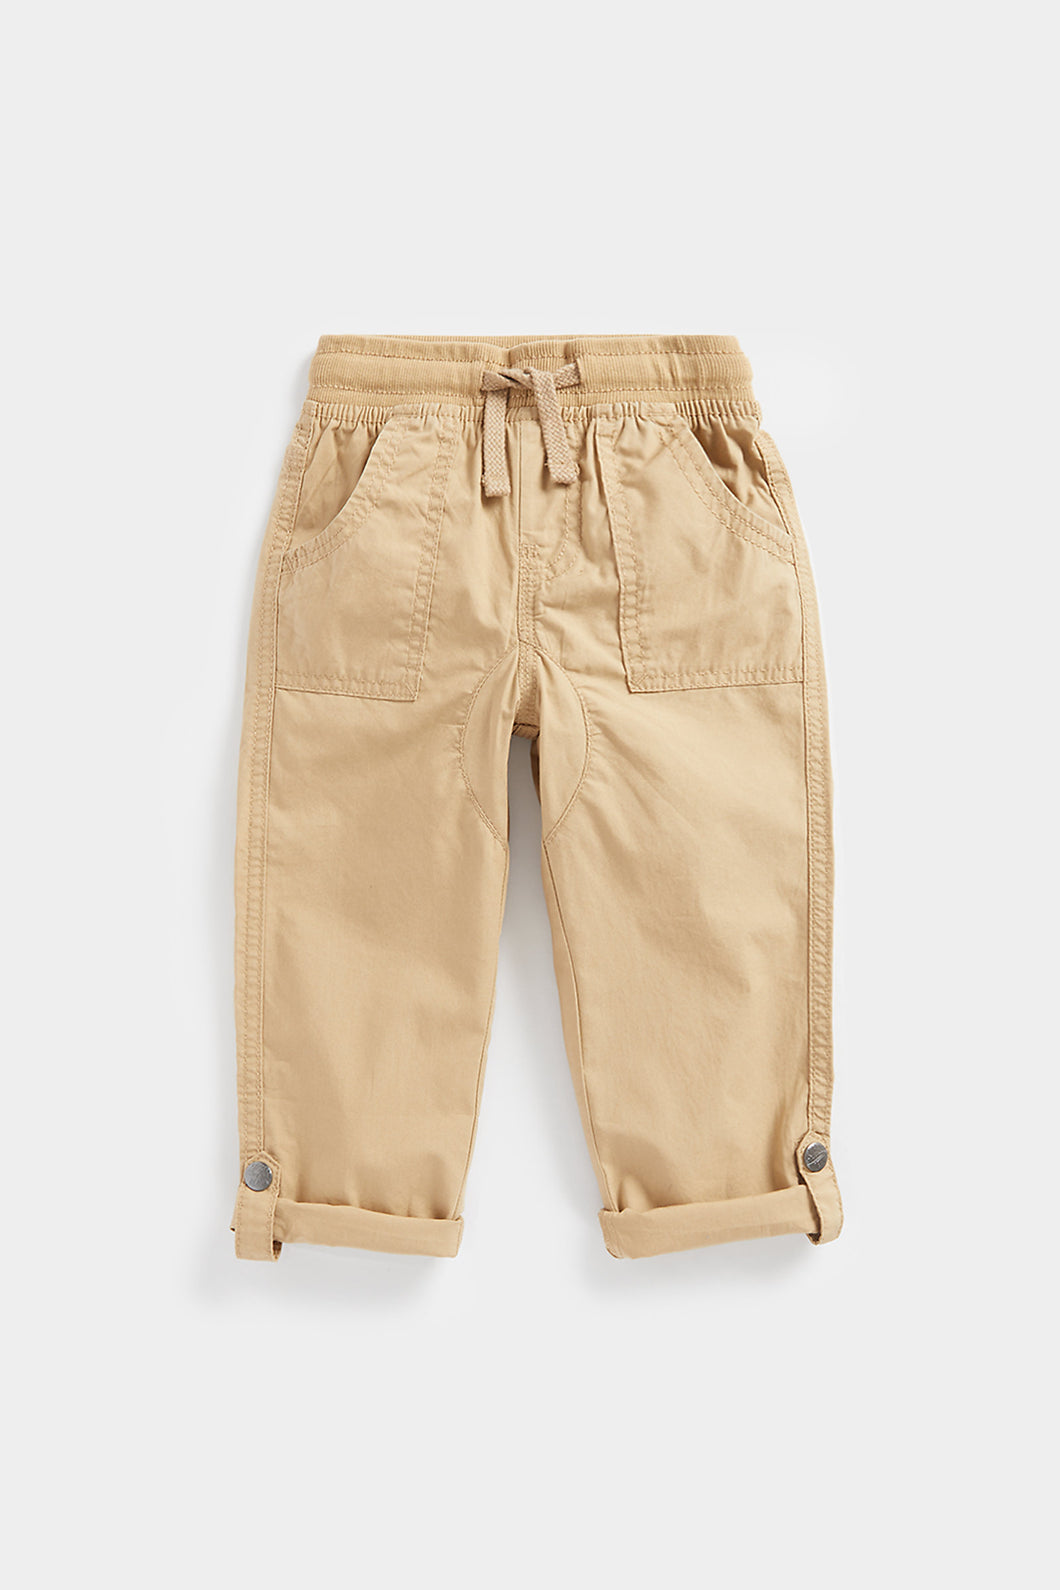 Mothercare Tan Poplin Roll-Up Trousers